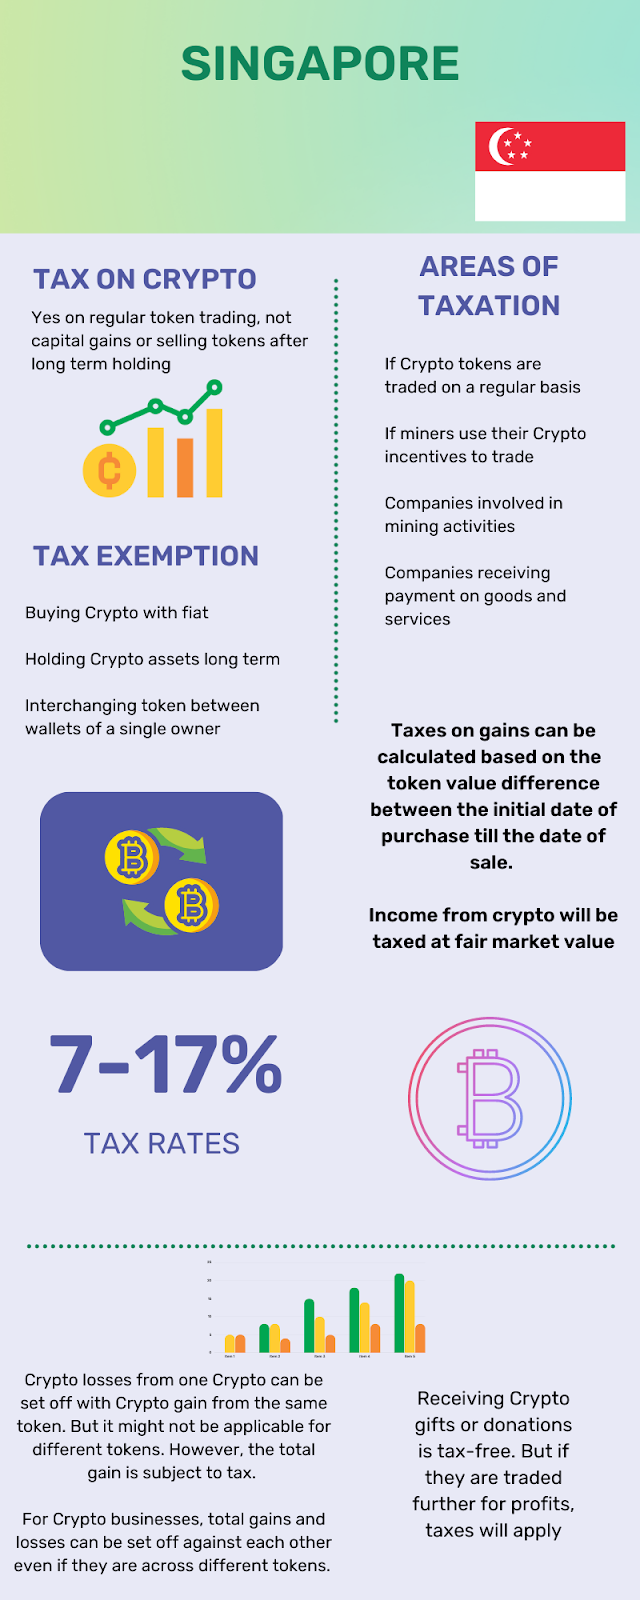 What Are Crypto Tokens? (And How Are They Taxed?)